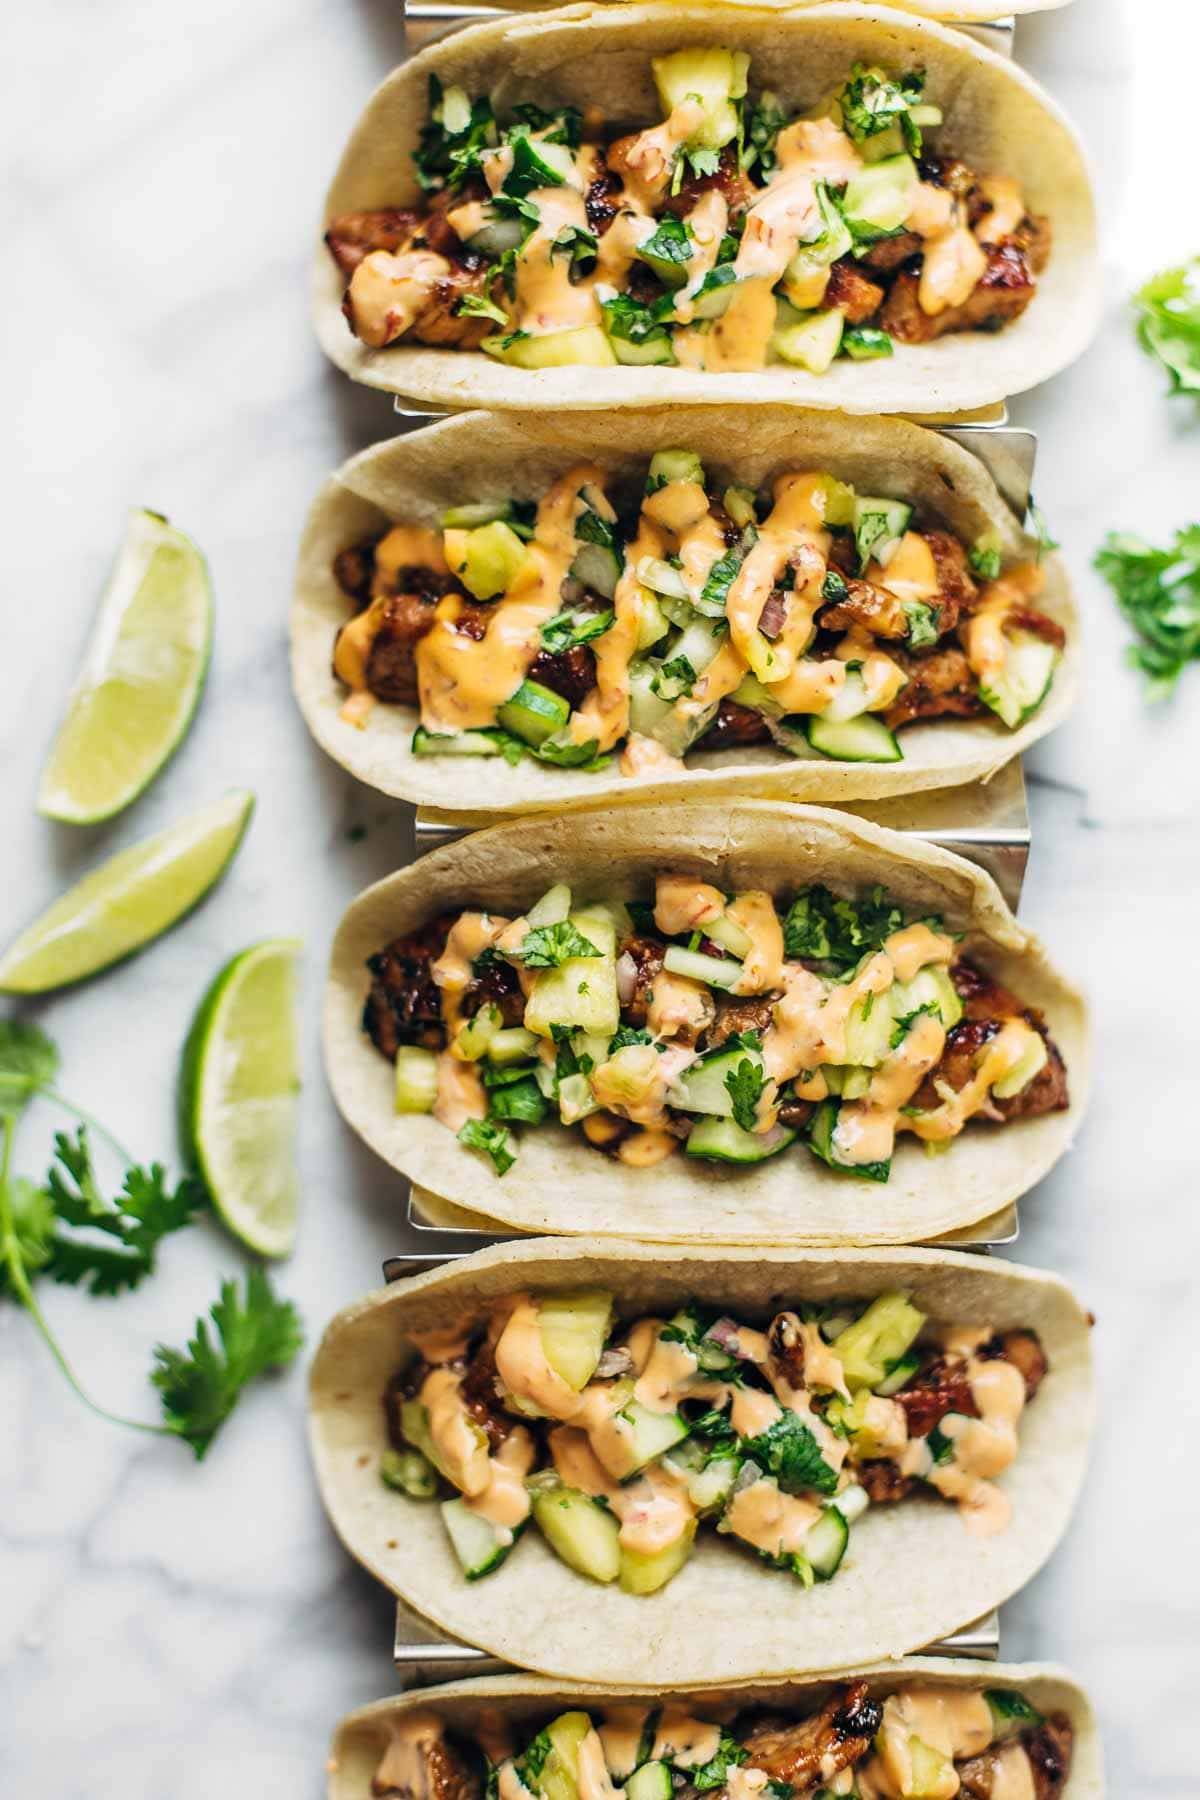 Caramelized Pork Tacos with Pineapple Salsa - topped with sriracha mayo, obviously. ♡ quick and easy to make - LOVE this recipe! | pinchofyum.com